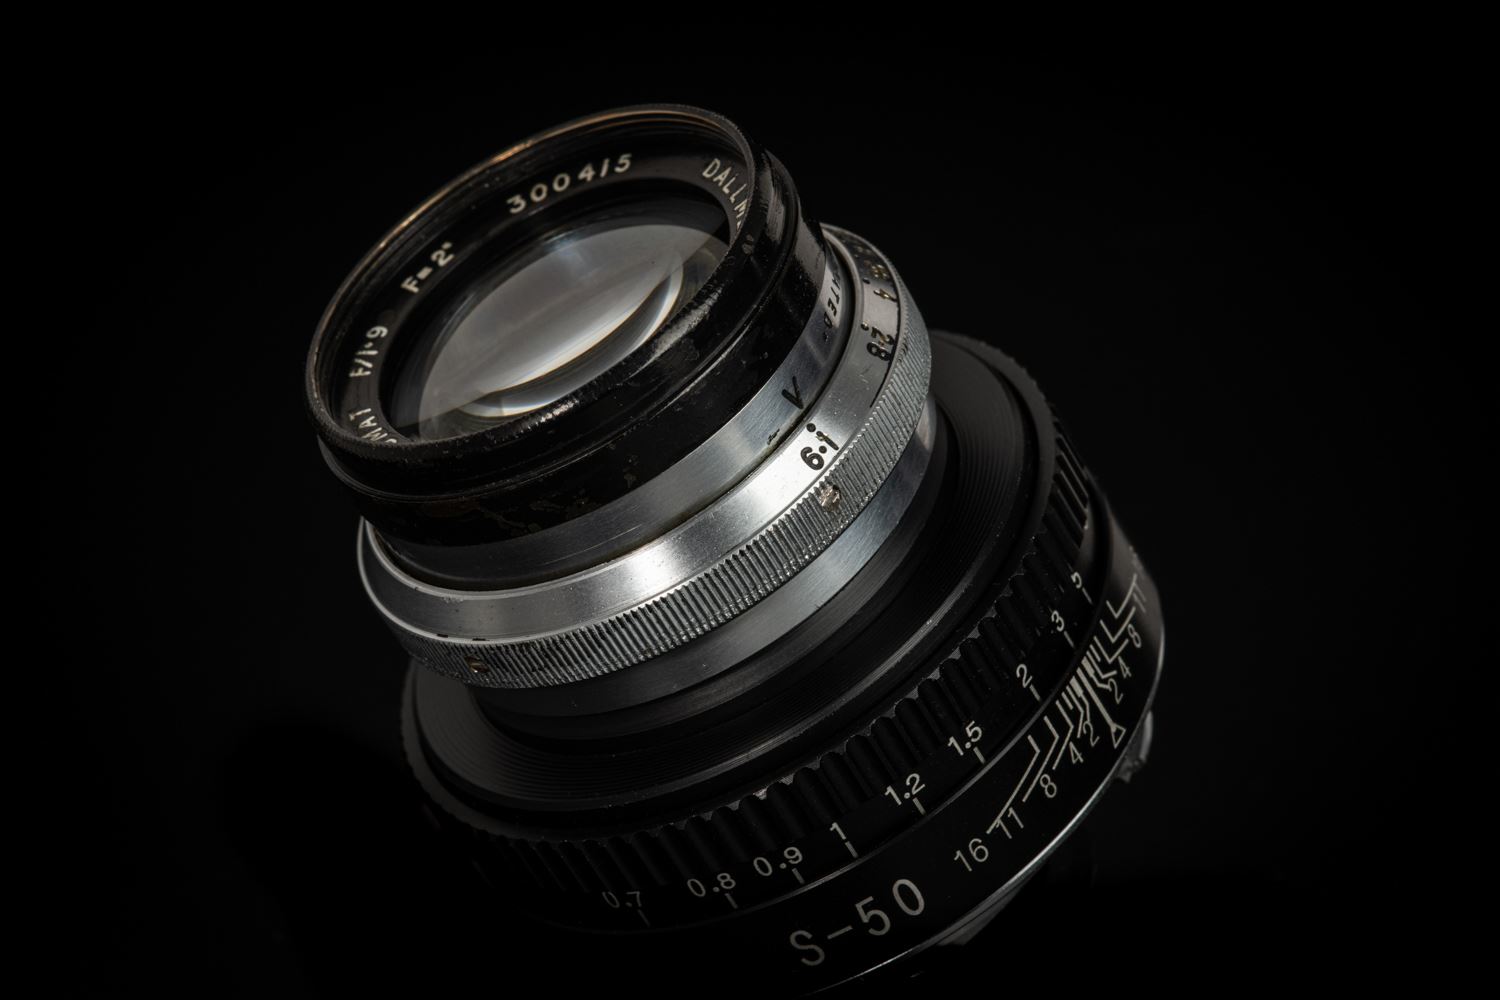 Picture of Dallmeyer Super-Six Anastigmat 2inch f/1.9 Modified to Leica M